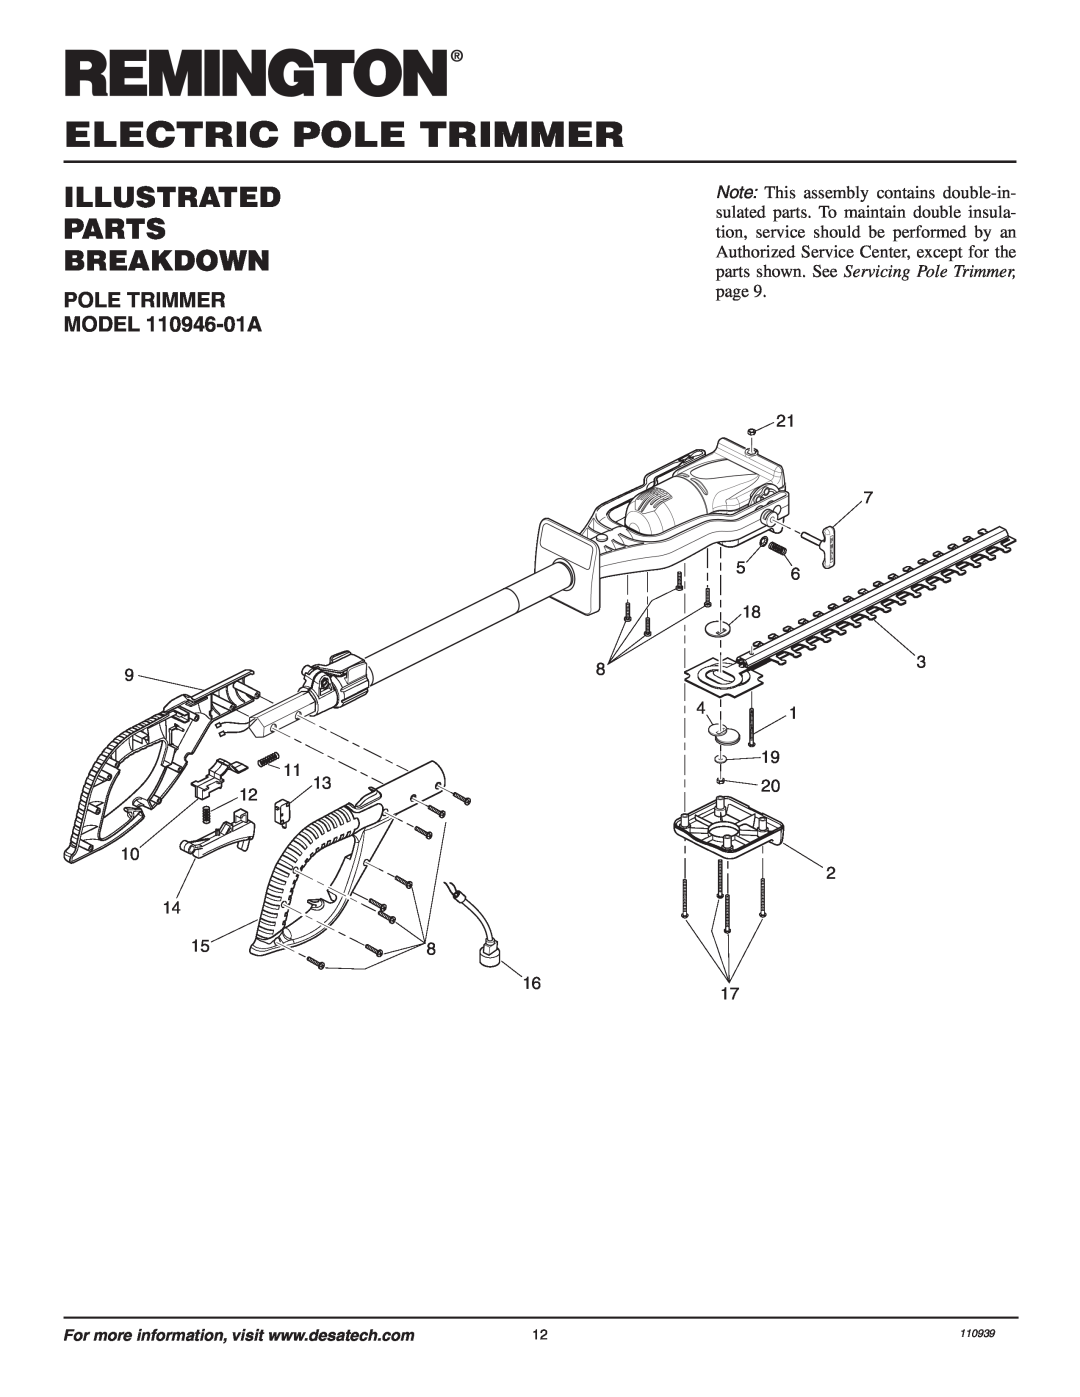 Desa owner manual Illustrated Parts Breakdown, POLE TRIMMER MODEL 110946-01A, Electric Pole Trimmer, 110939 